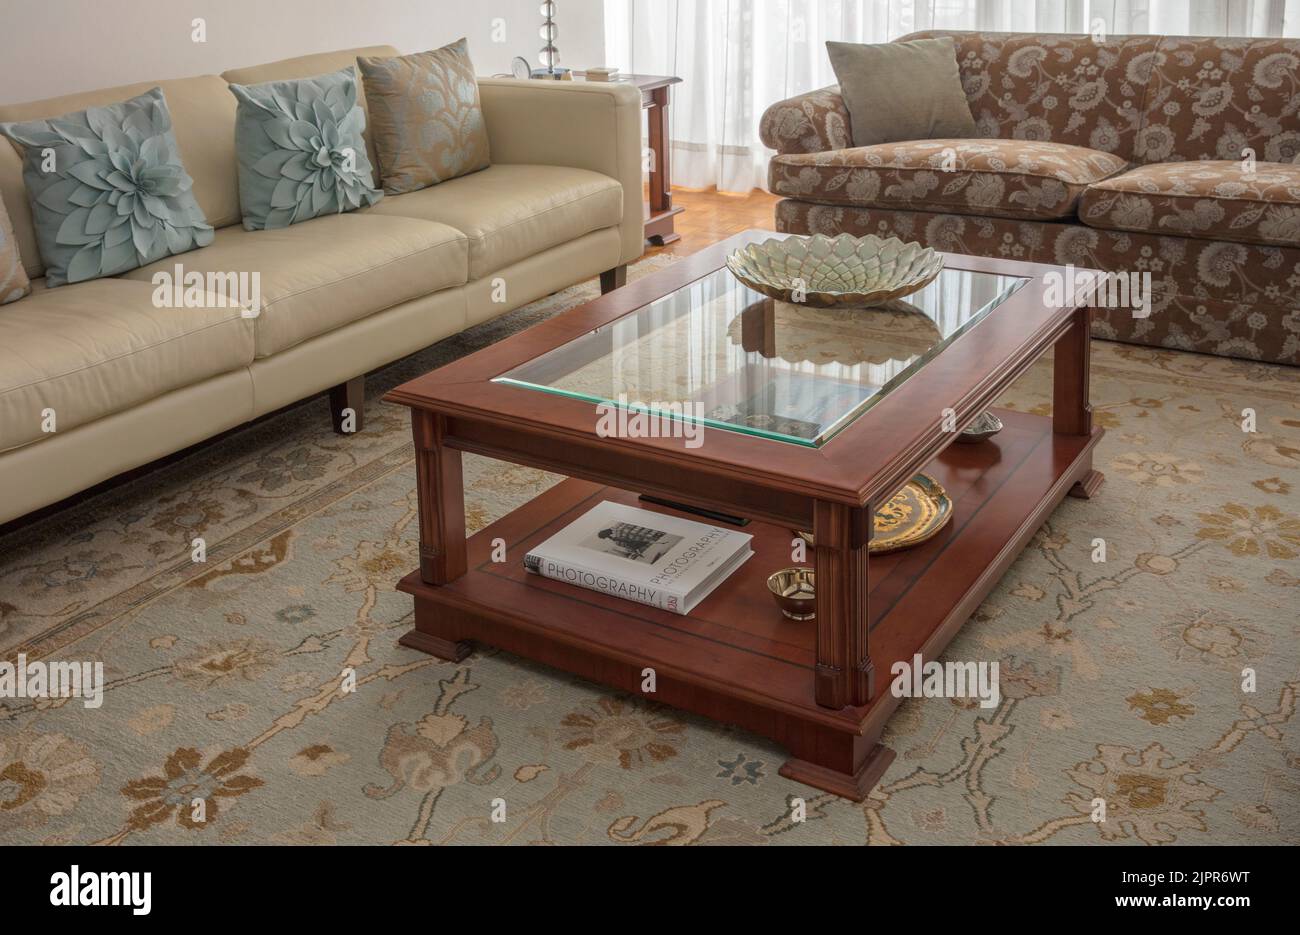 Coffee table in lounge/living room with all parts in focus Stock Photo